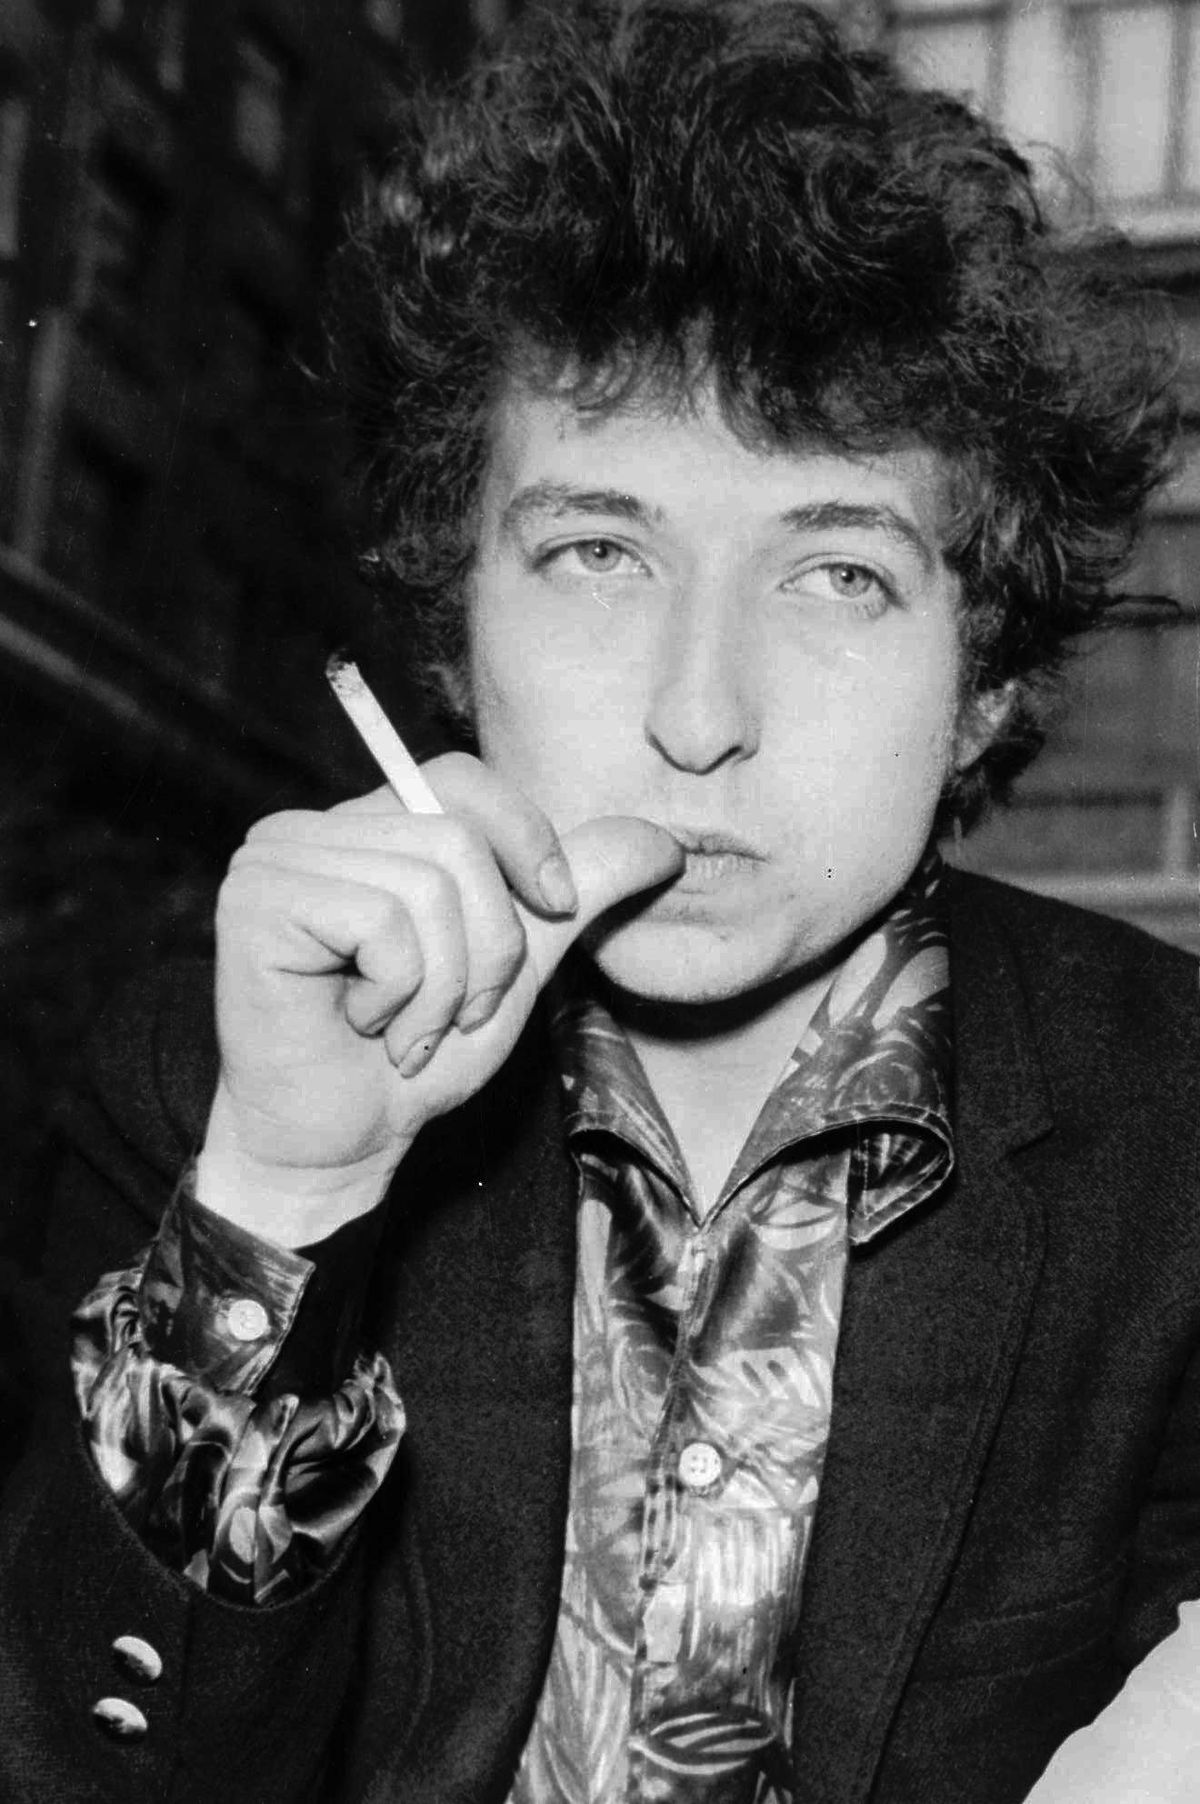 This April 27, 1965, file photo, shows Singer Bob Dylan in London. Dylan was named the winner of the 2016 Nobel Prize in literature Thursday, Oct. 13, 2016, in a stunning announcement that for the first time bestowed the prestigious award to someone primarily seen as a musician. (Associated Press)